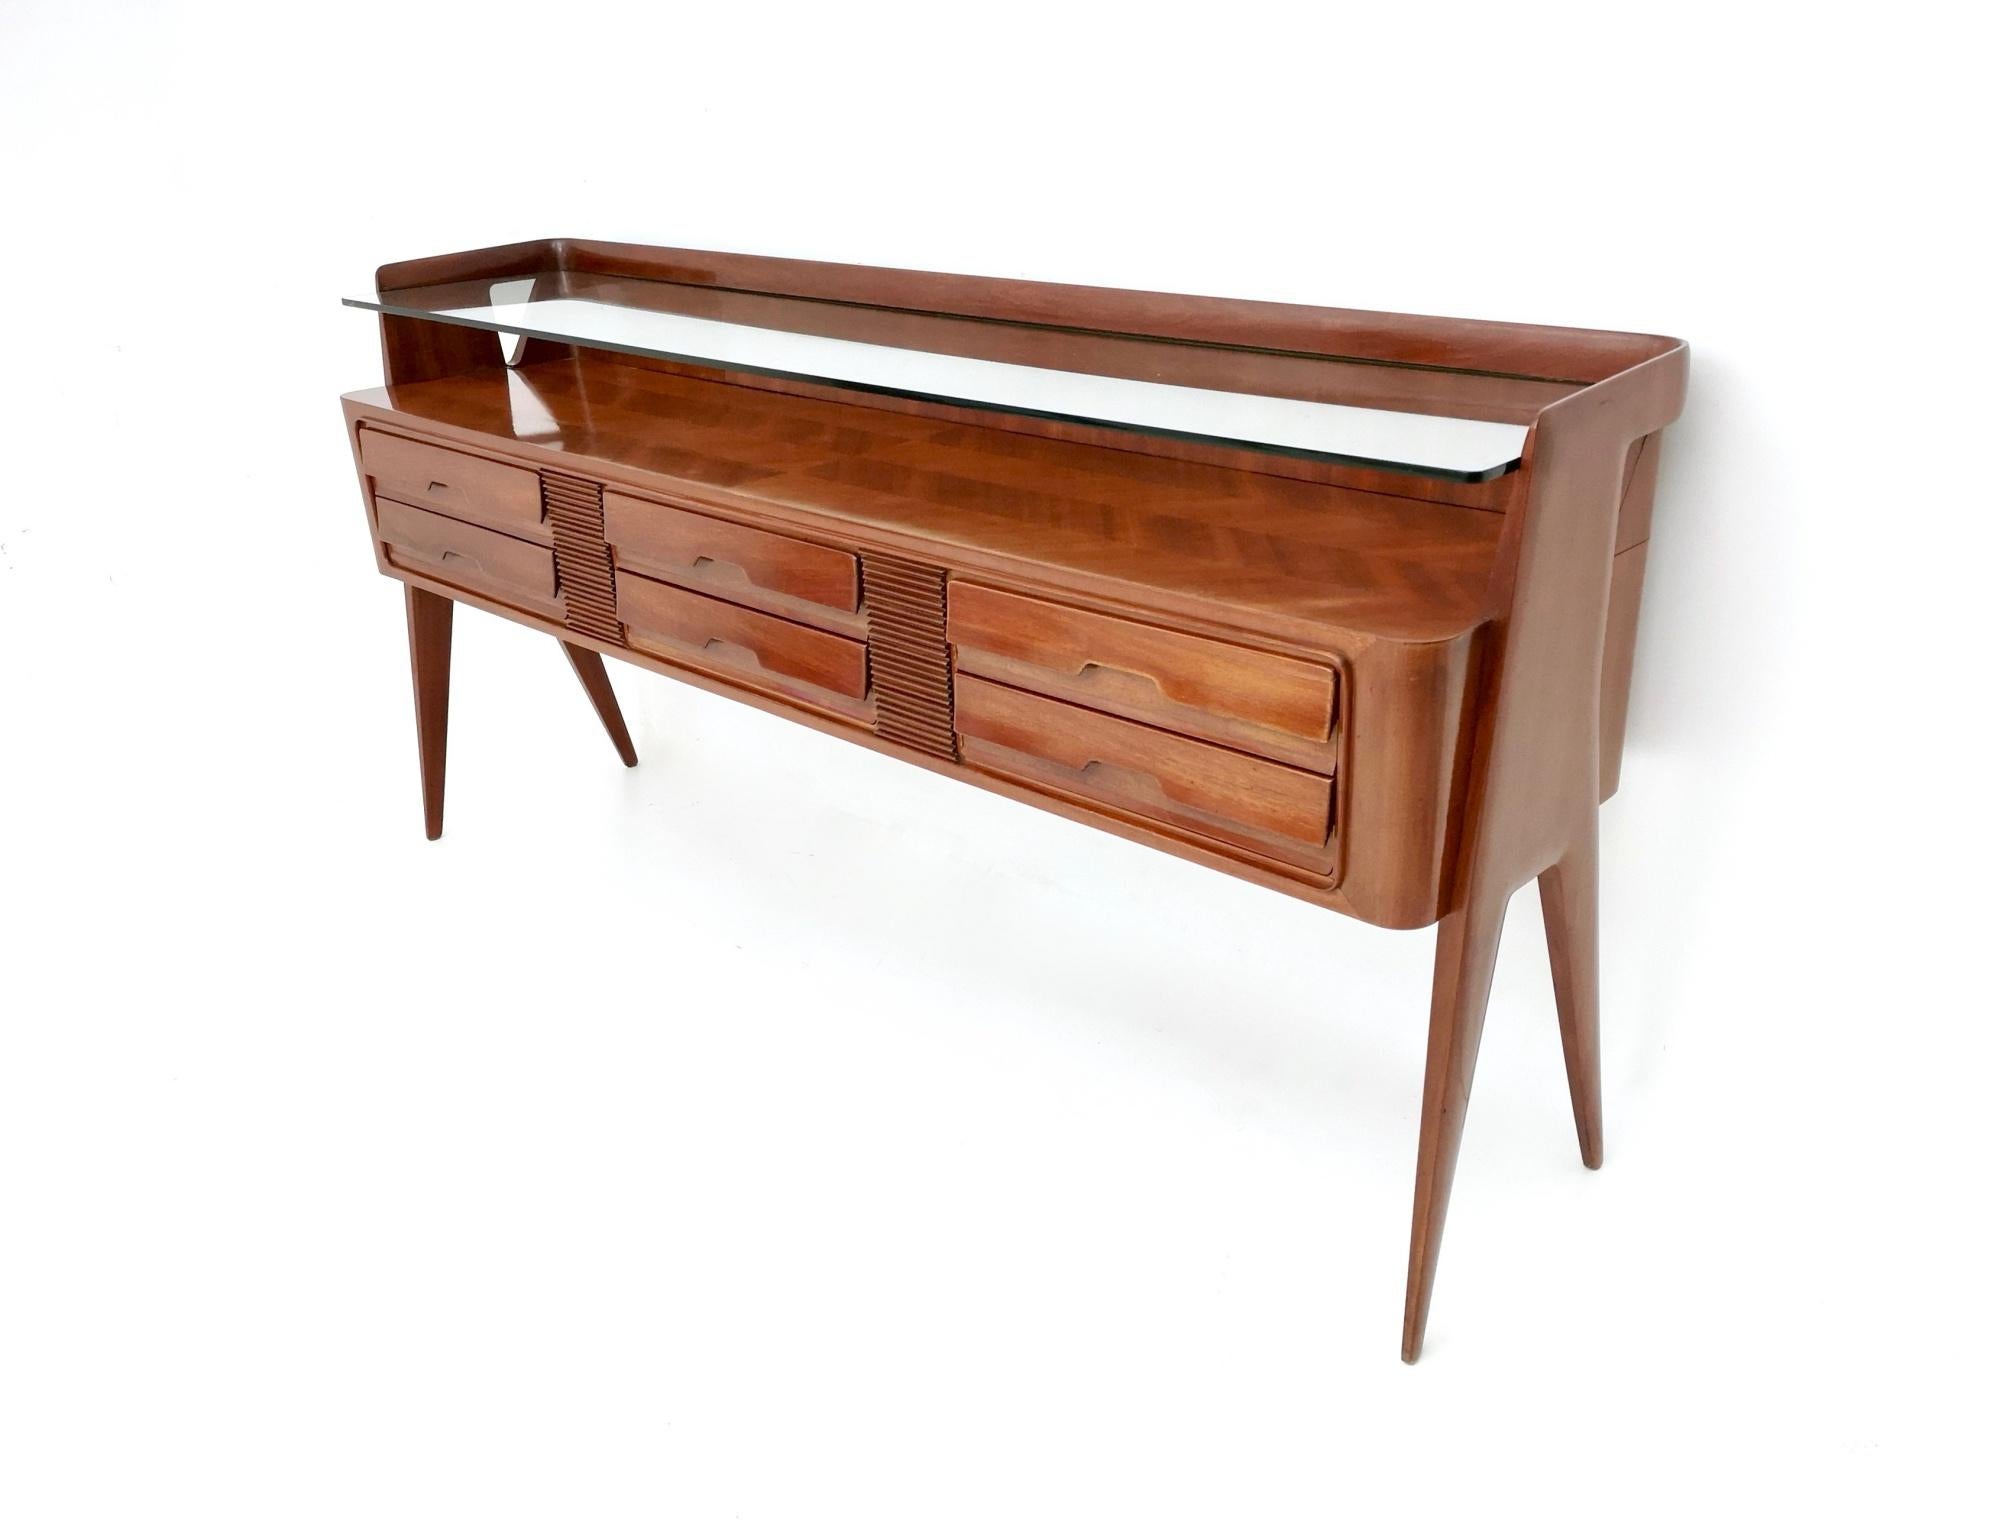 Italian High-Quality Wooden Dresser by La Permanente Mobili Cantù, Italy, 1950s